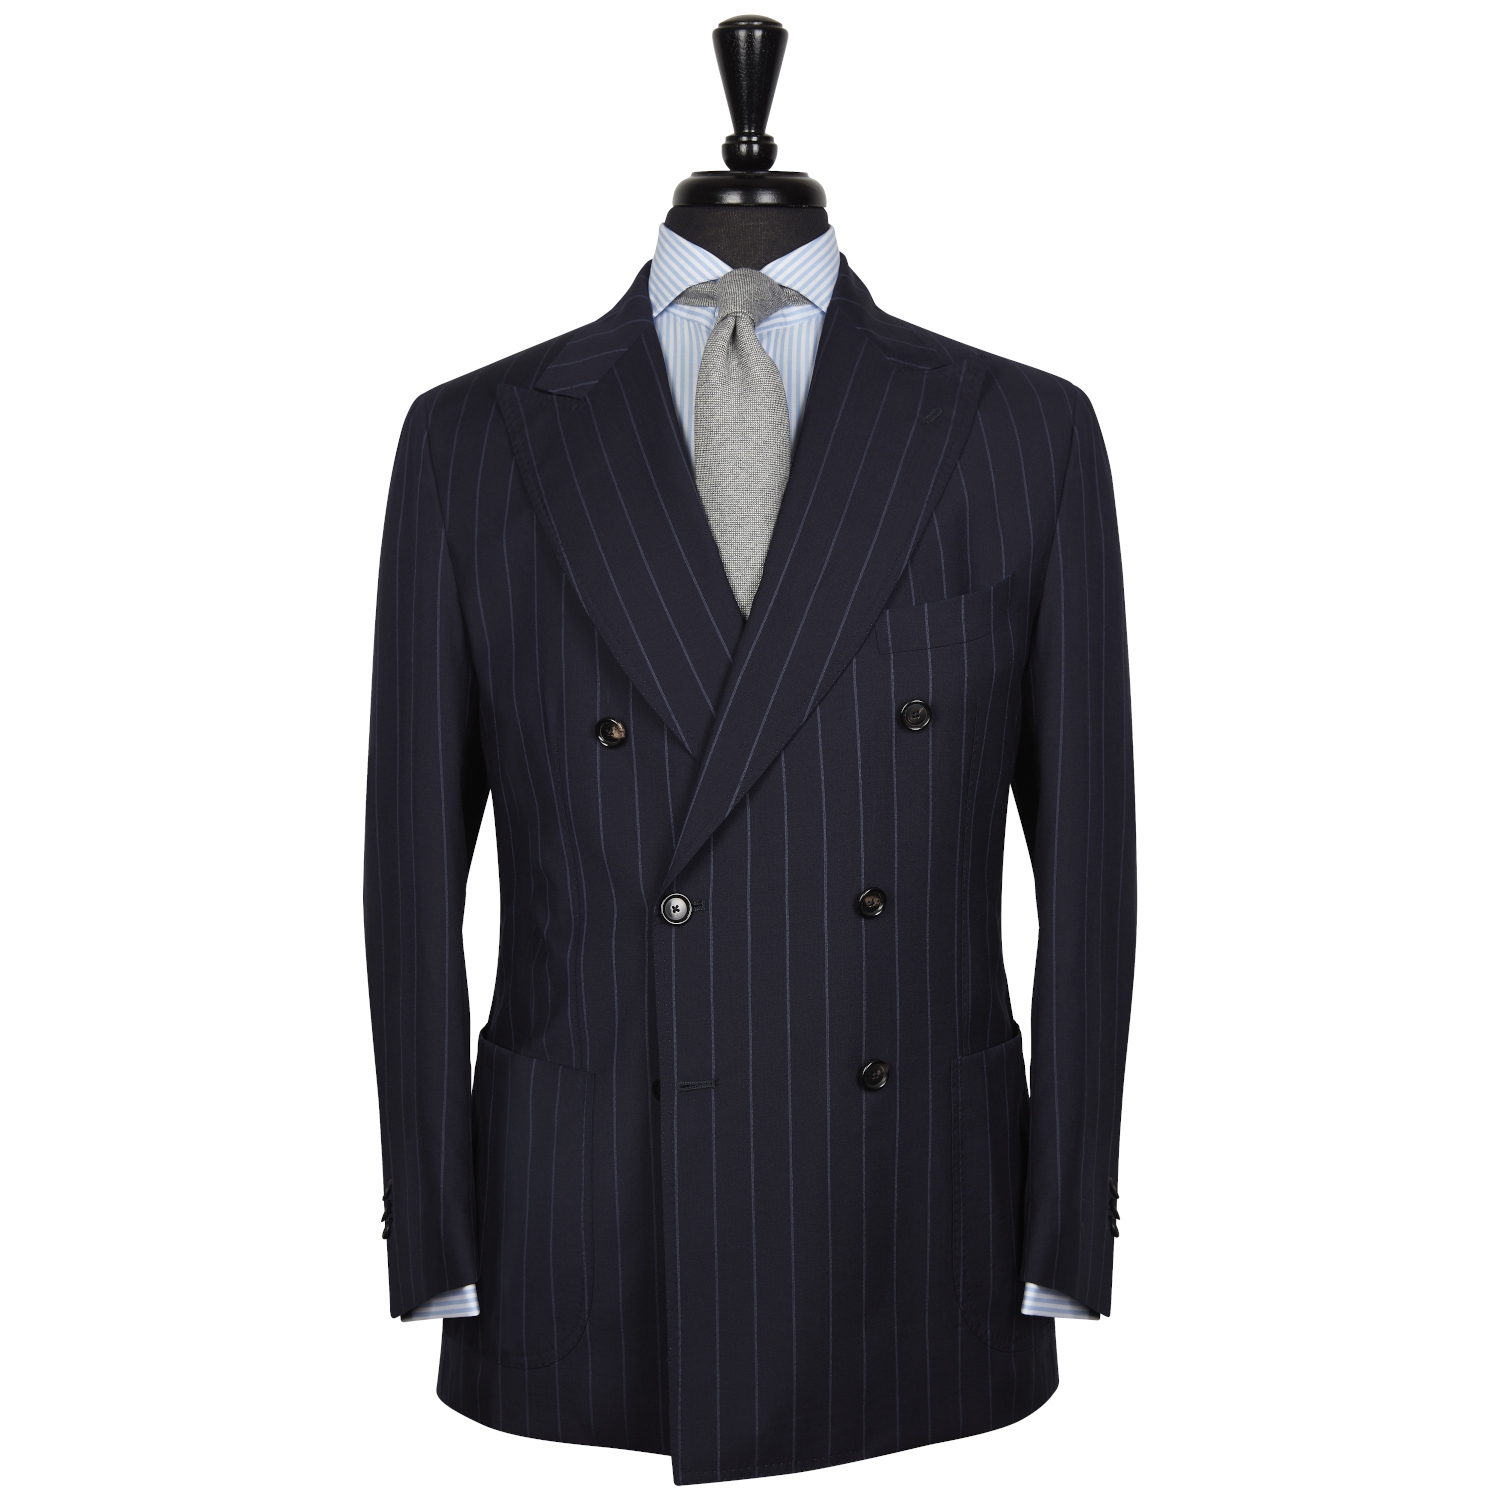 SSM16 – NAVY CHALKSTRIPE DOUBLE BREASTED TWO PIECE NEAPOLITAN SUIT